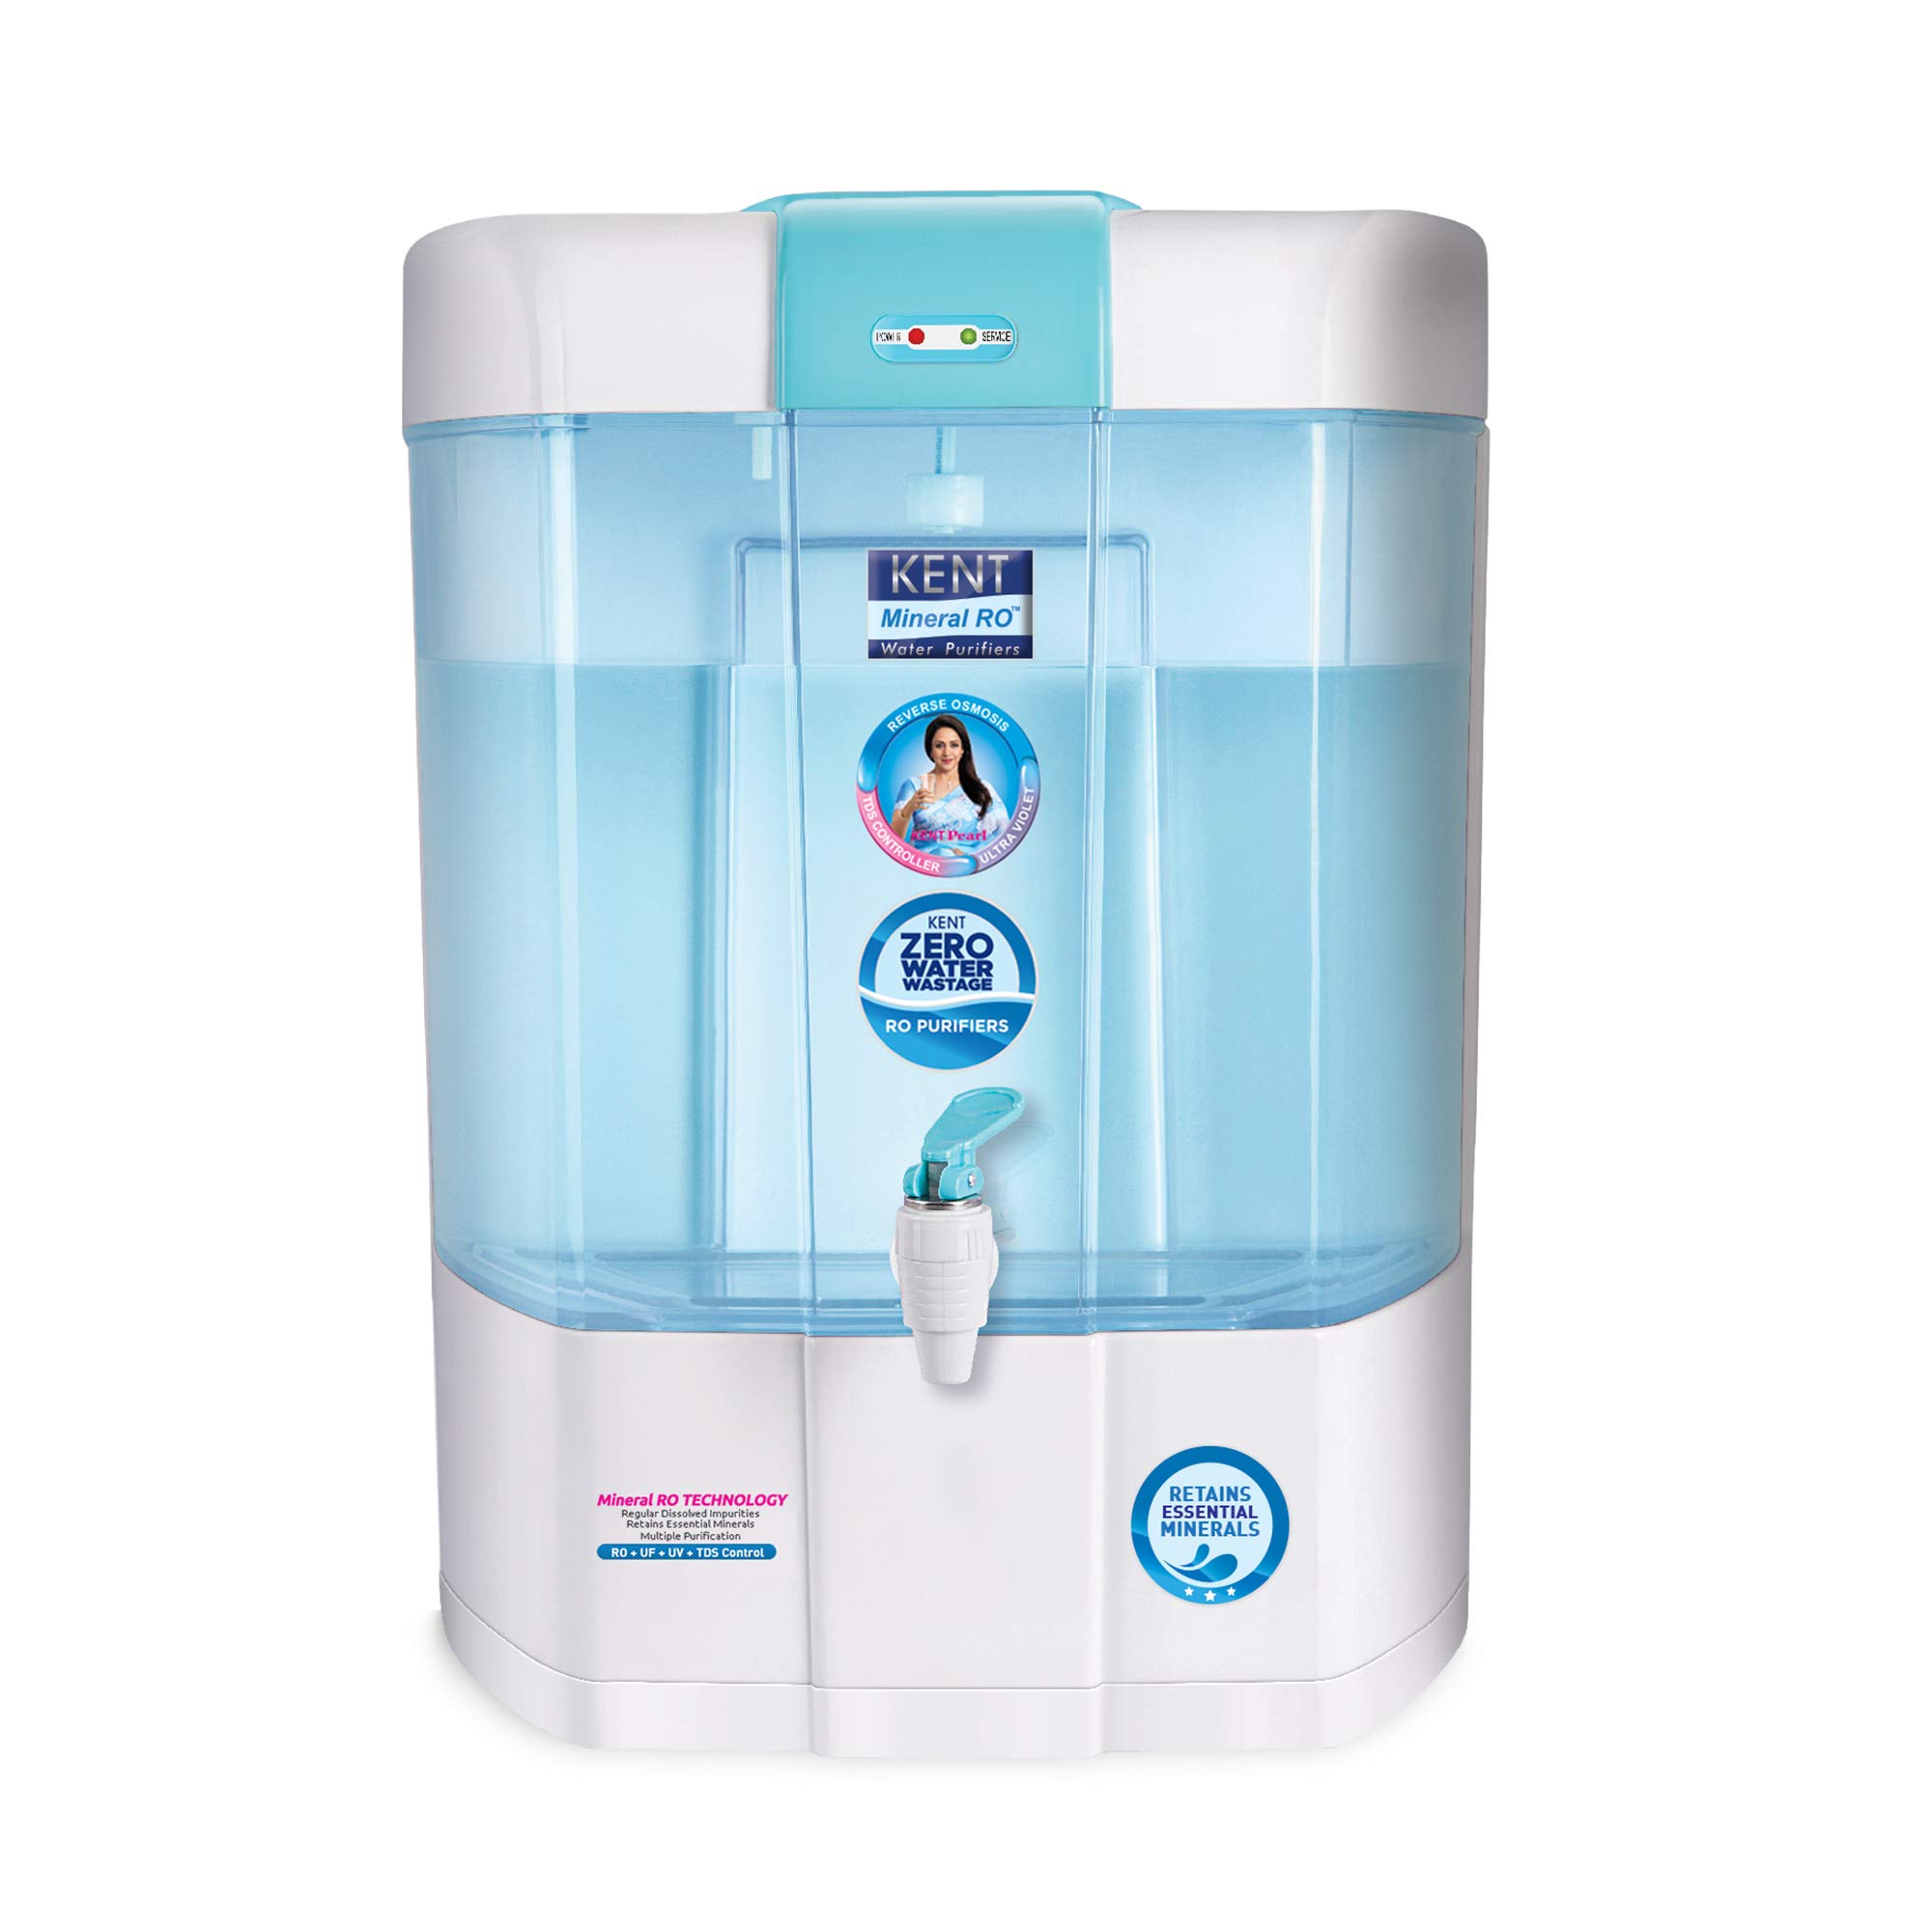 Water Purifier Repair and Service Center number near Churchgate | Dial 9892323247